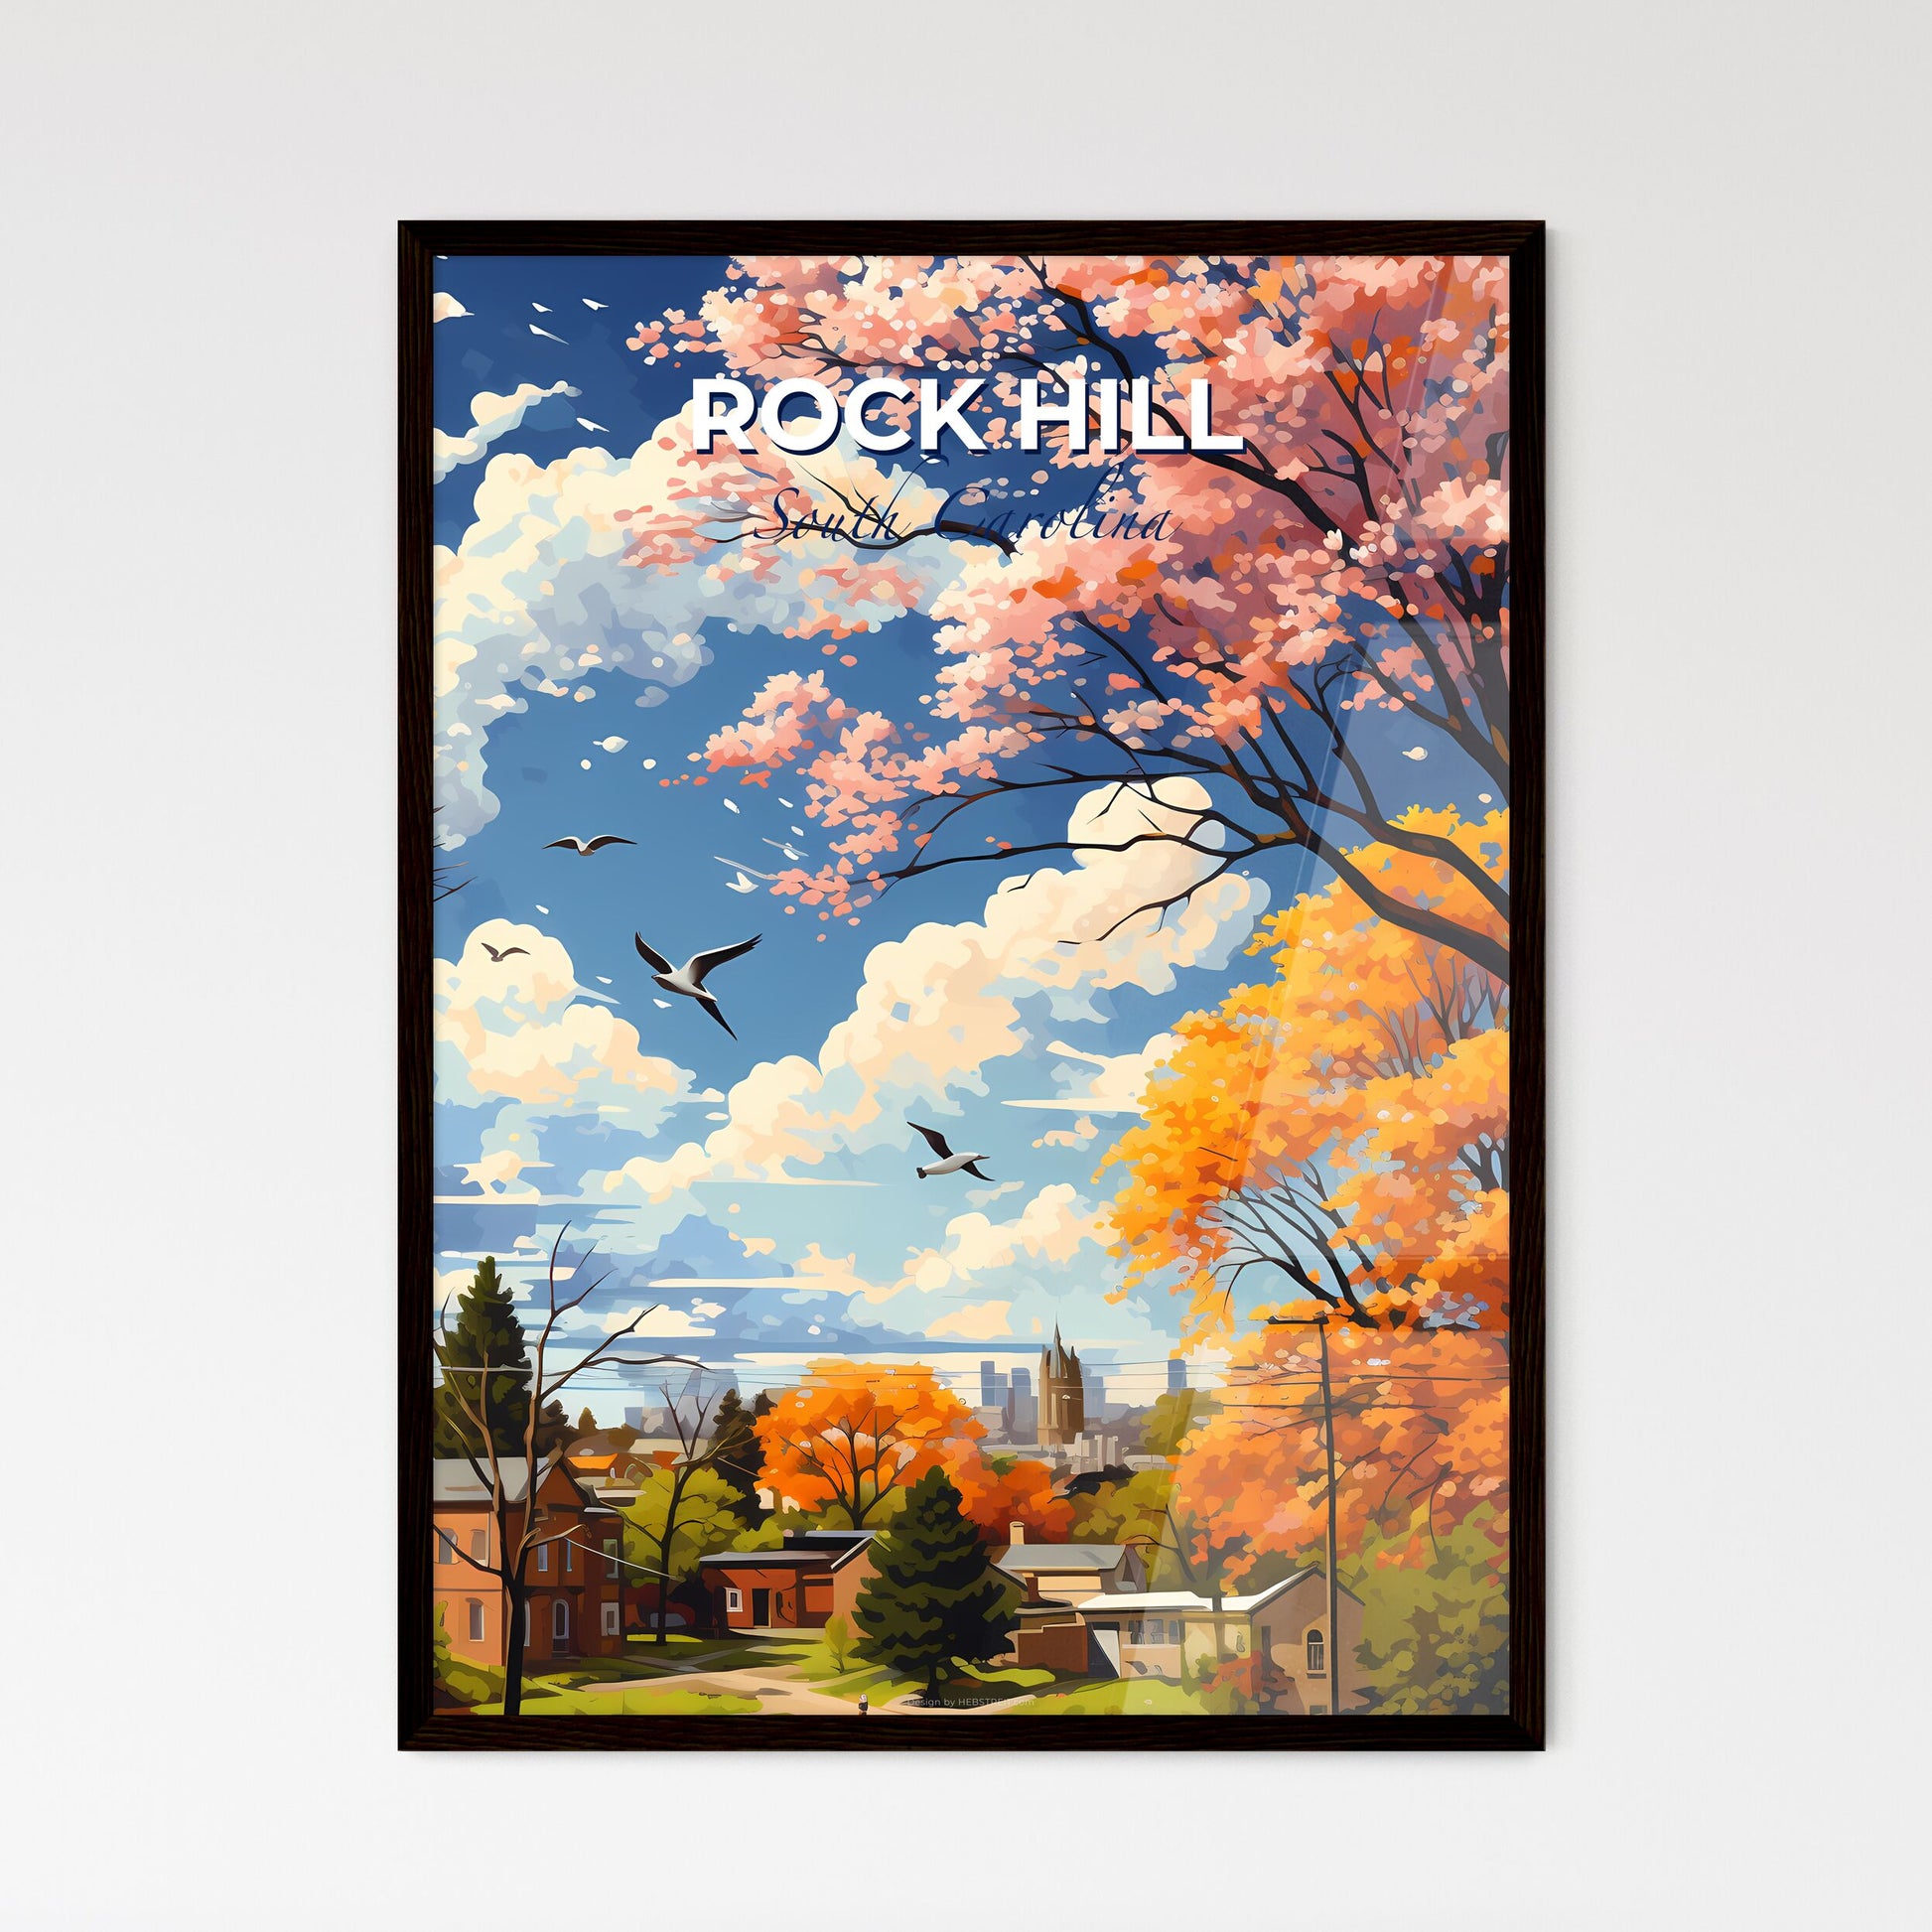 Rock Hill, South Carolina, A Poster of birds flying over trees Default Title